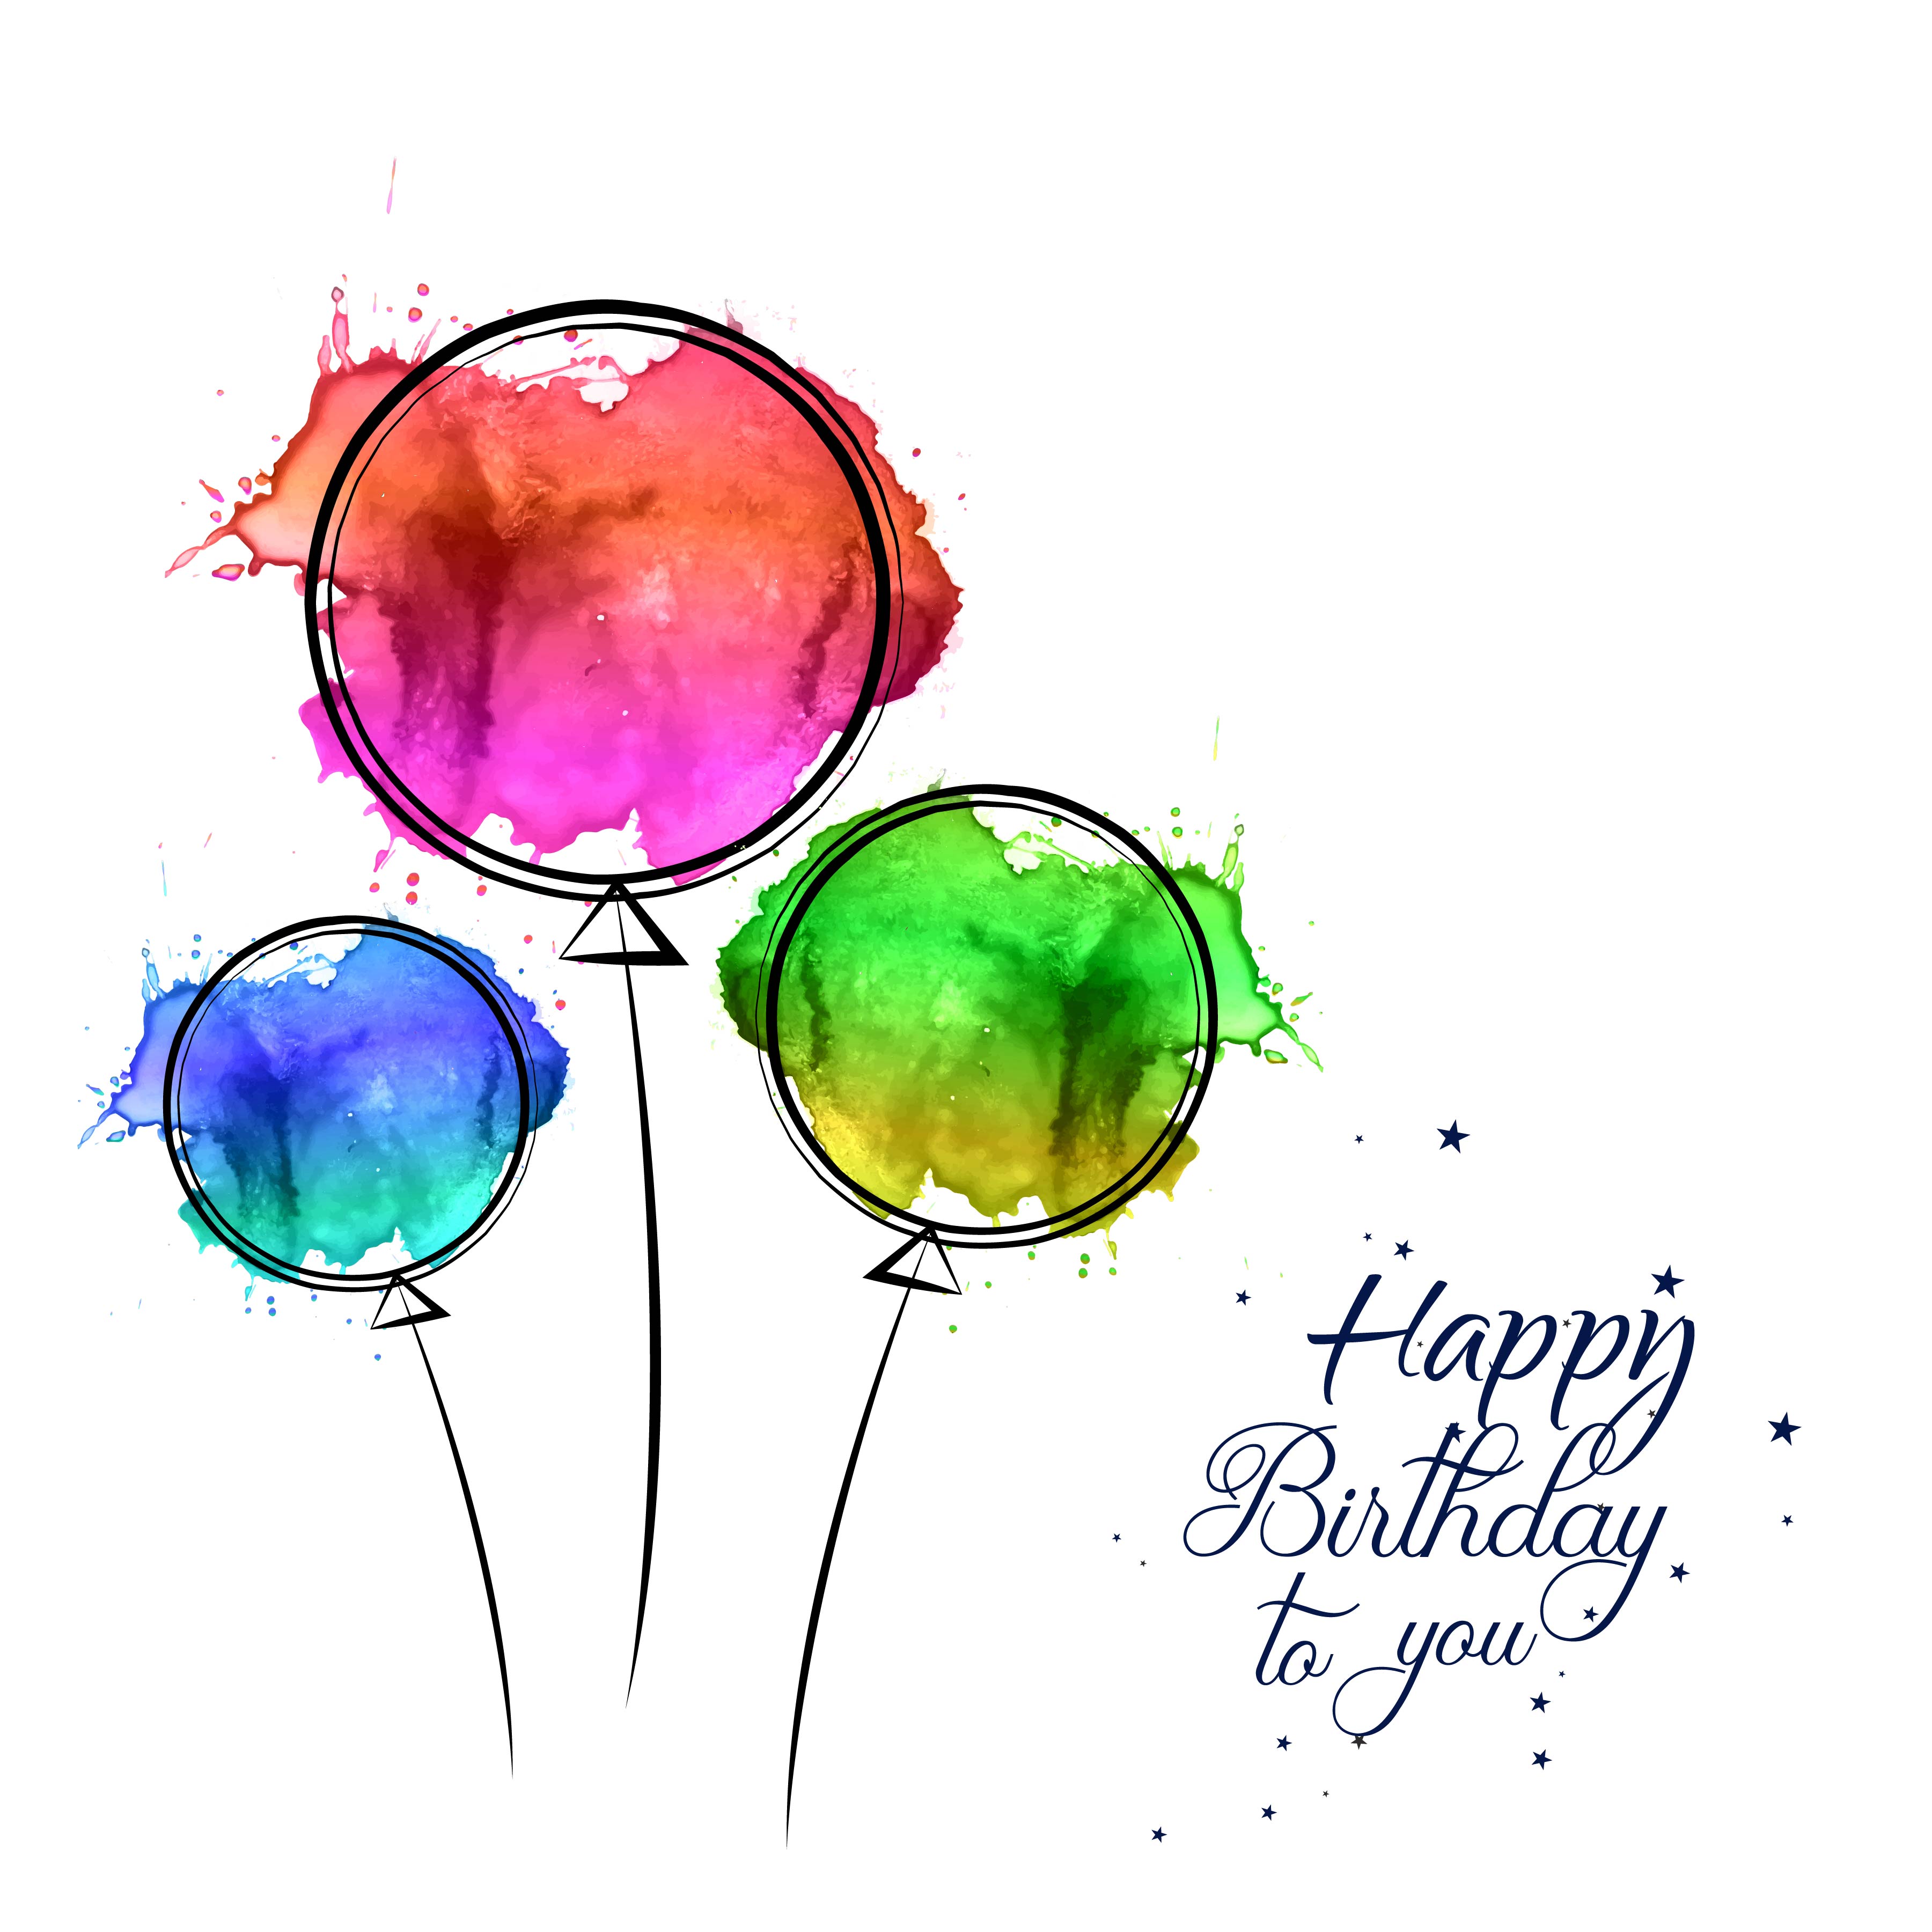 happy-birthday-card-with-watercolor-hand-drawn-balloons-design-257329